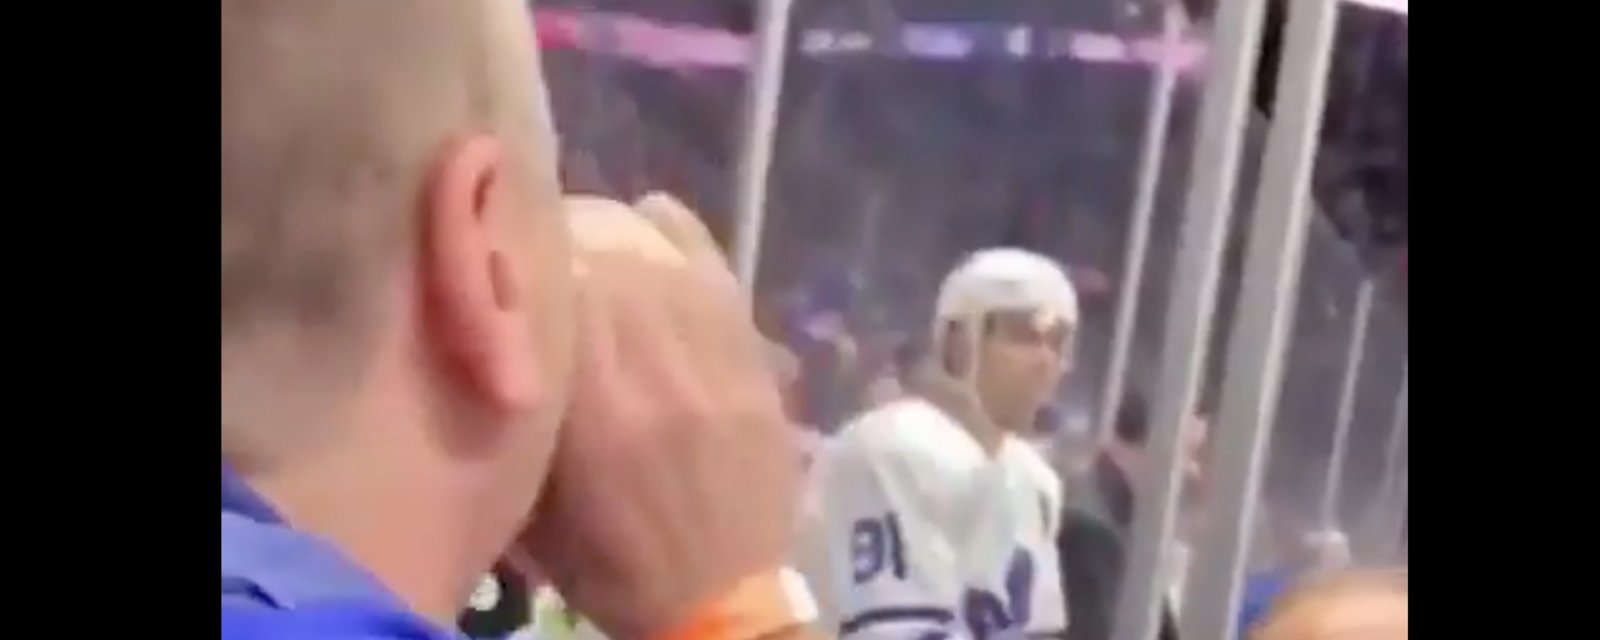 Isles fan screams insults right in Tavares’ face, gets the Leafs superstar to react